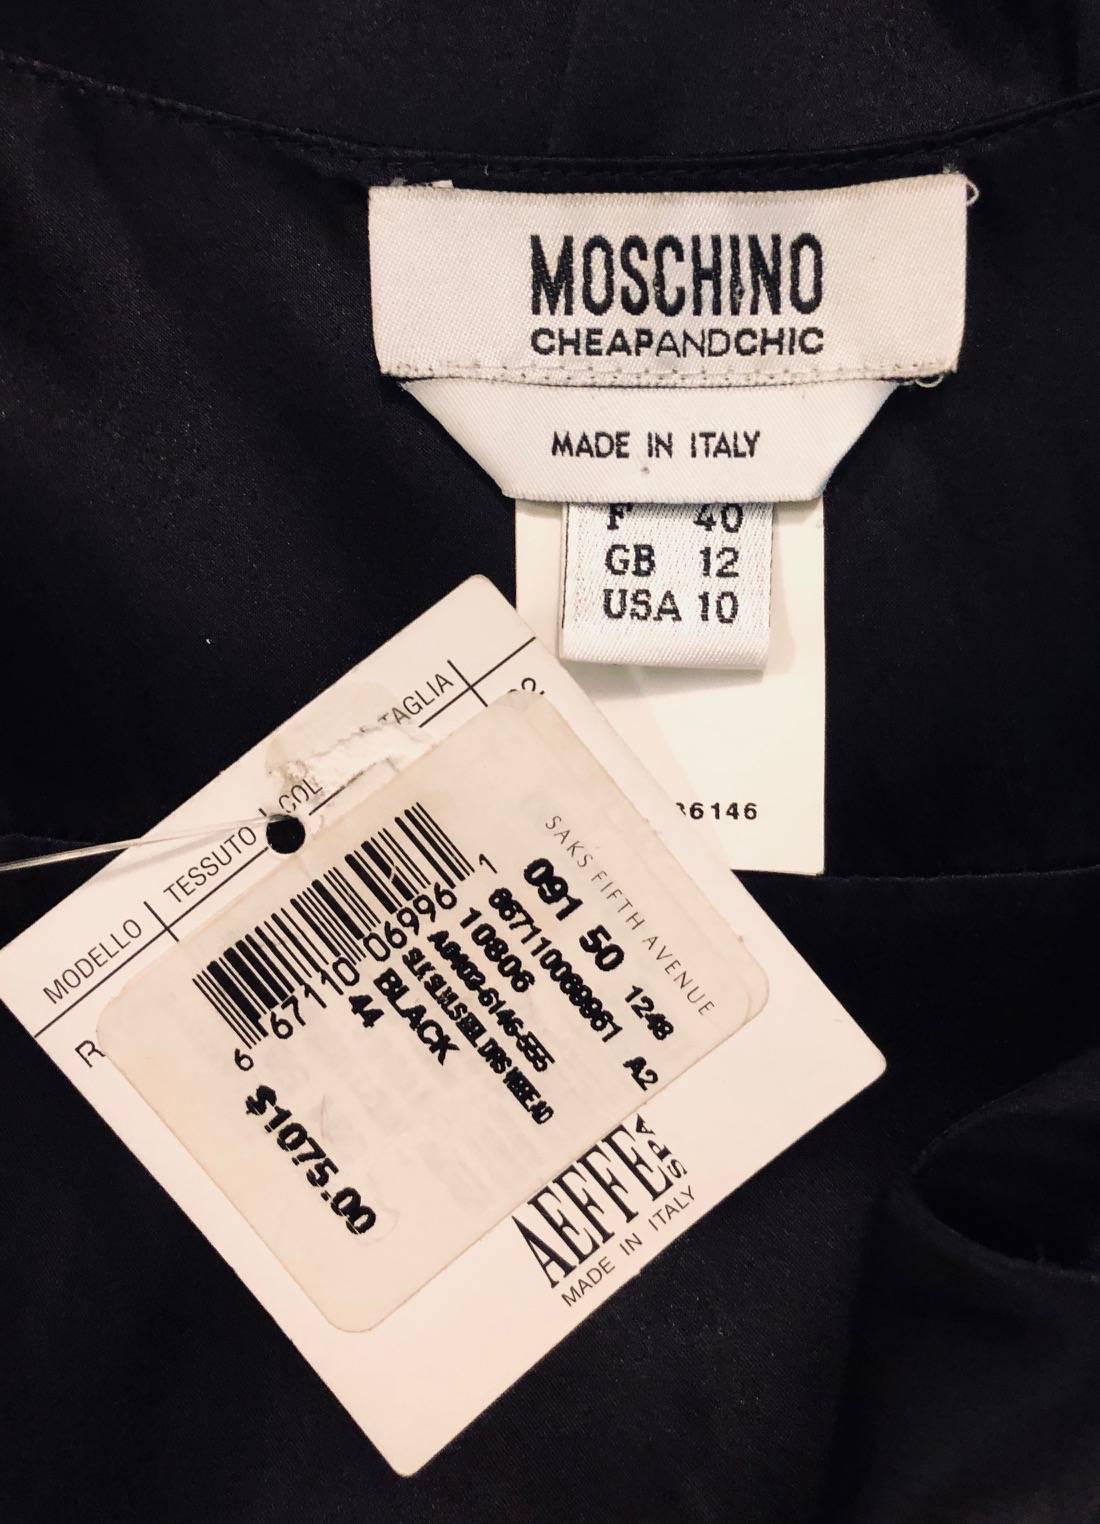 Memorable Moschino Black Silk Dress With Oscillating Black Beads at Waist  For Sale 2